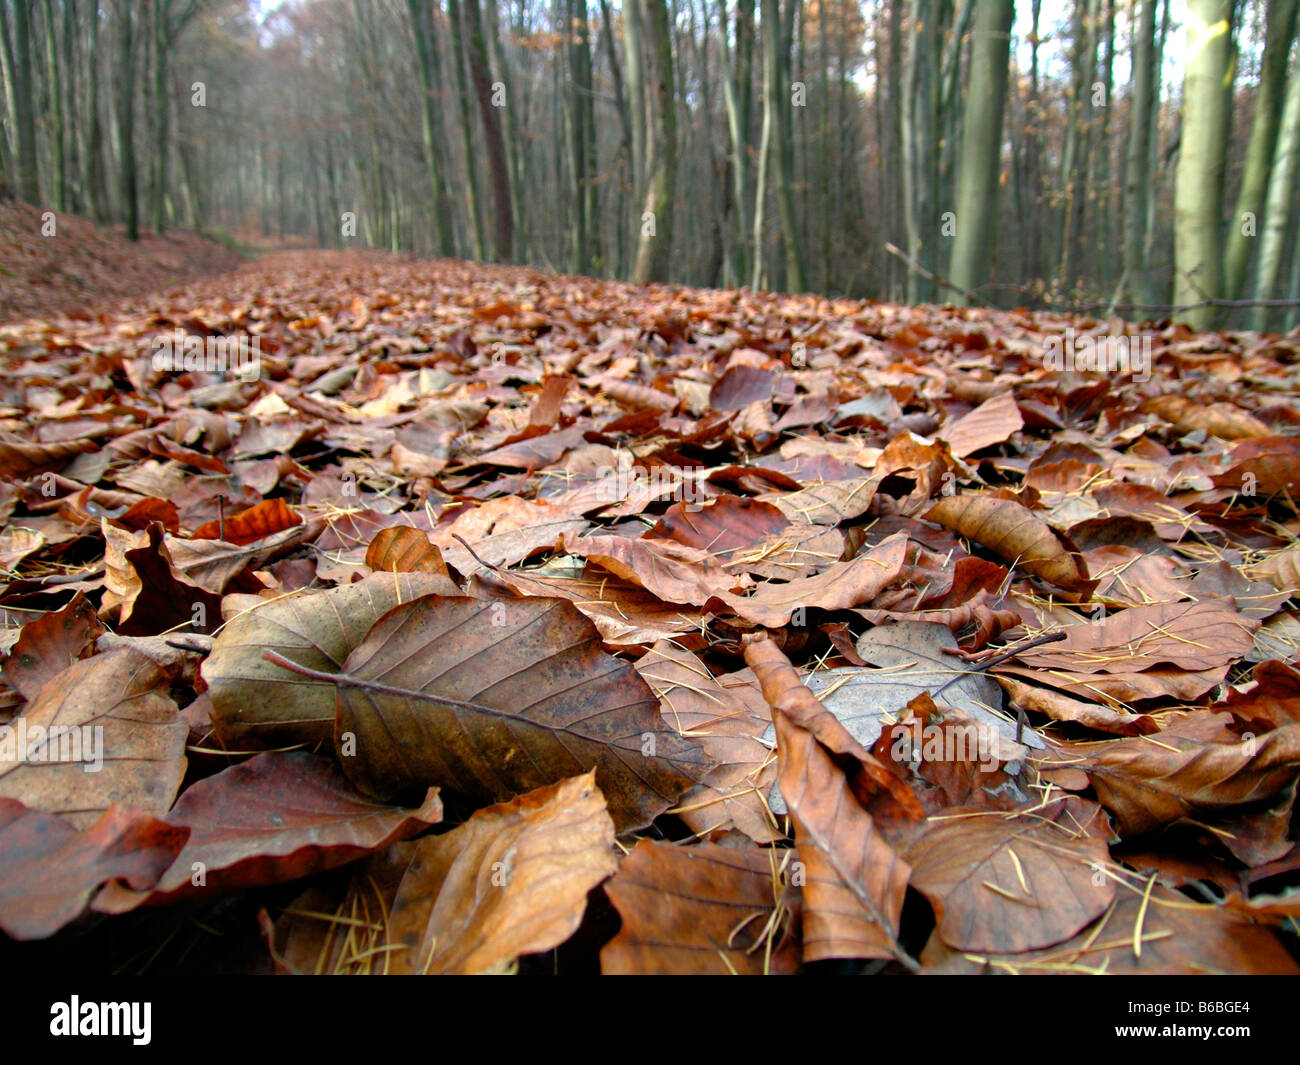 Fallen leaves on road in forest Stock Photo